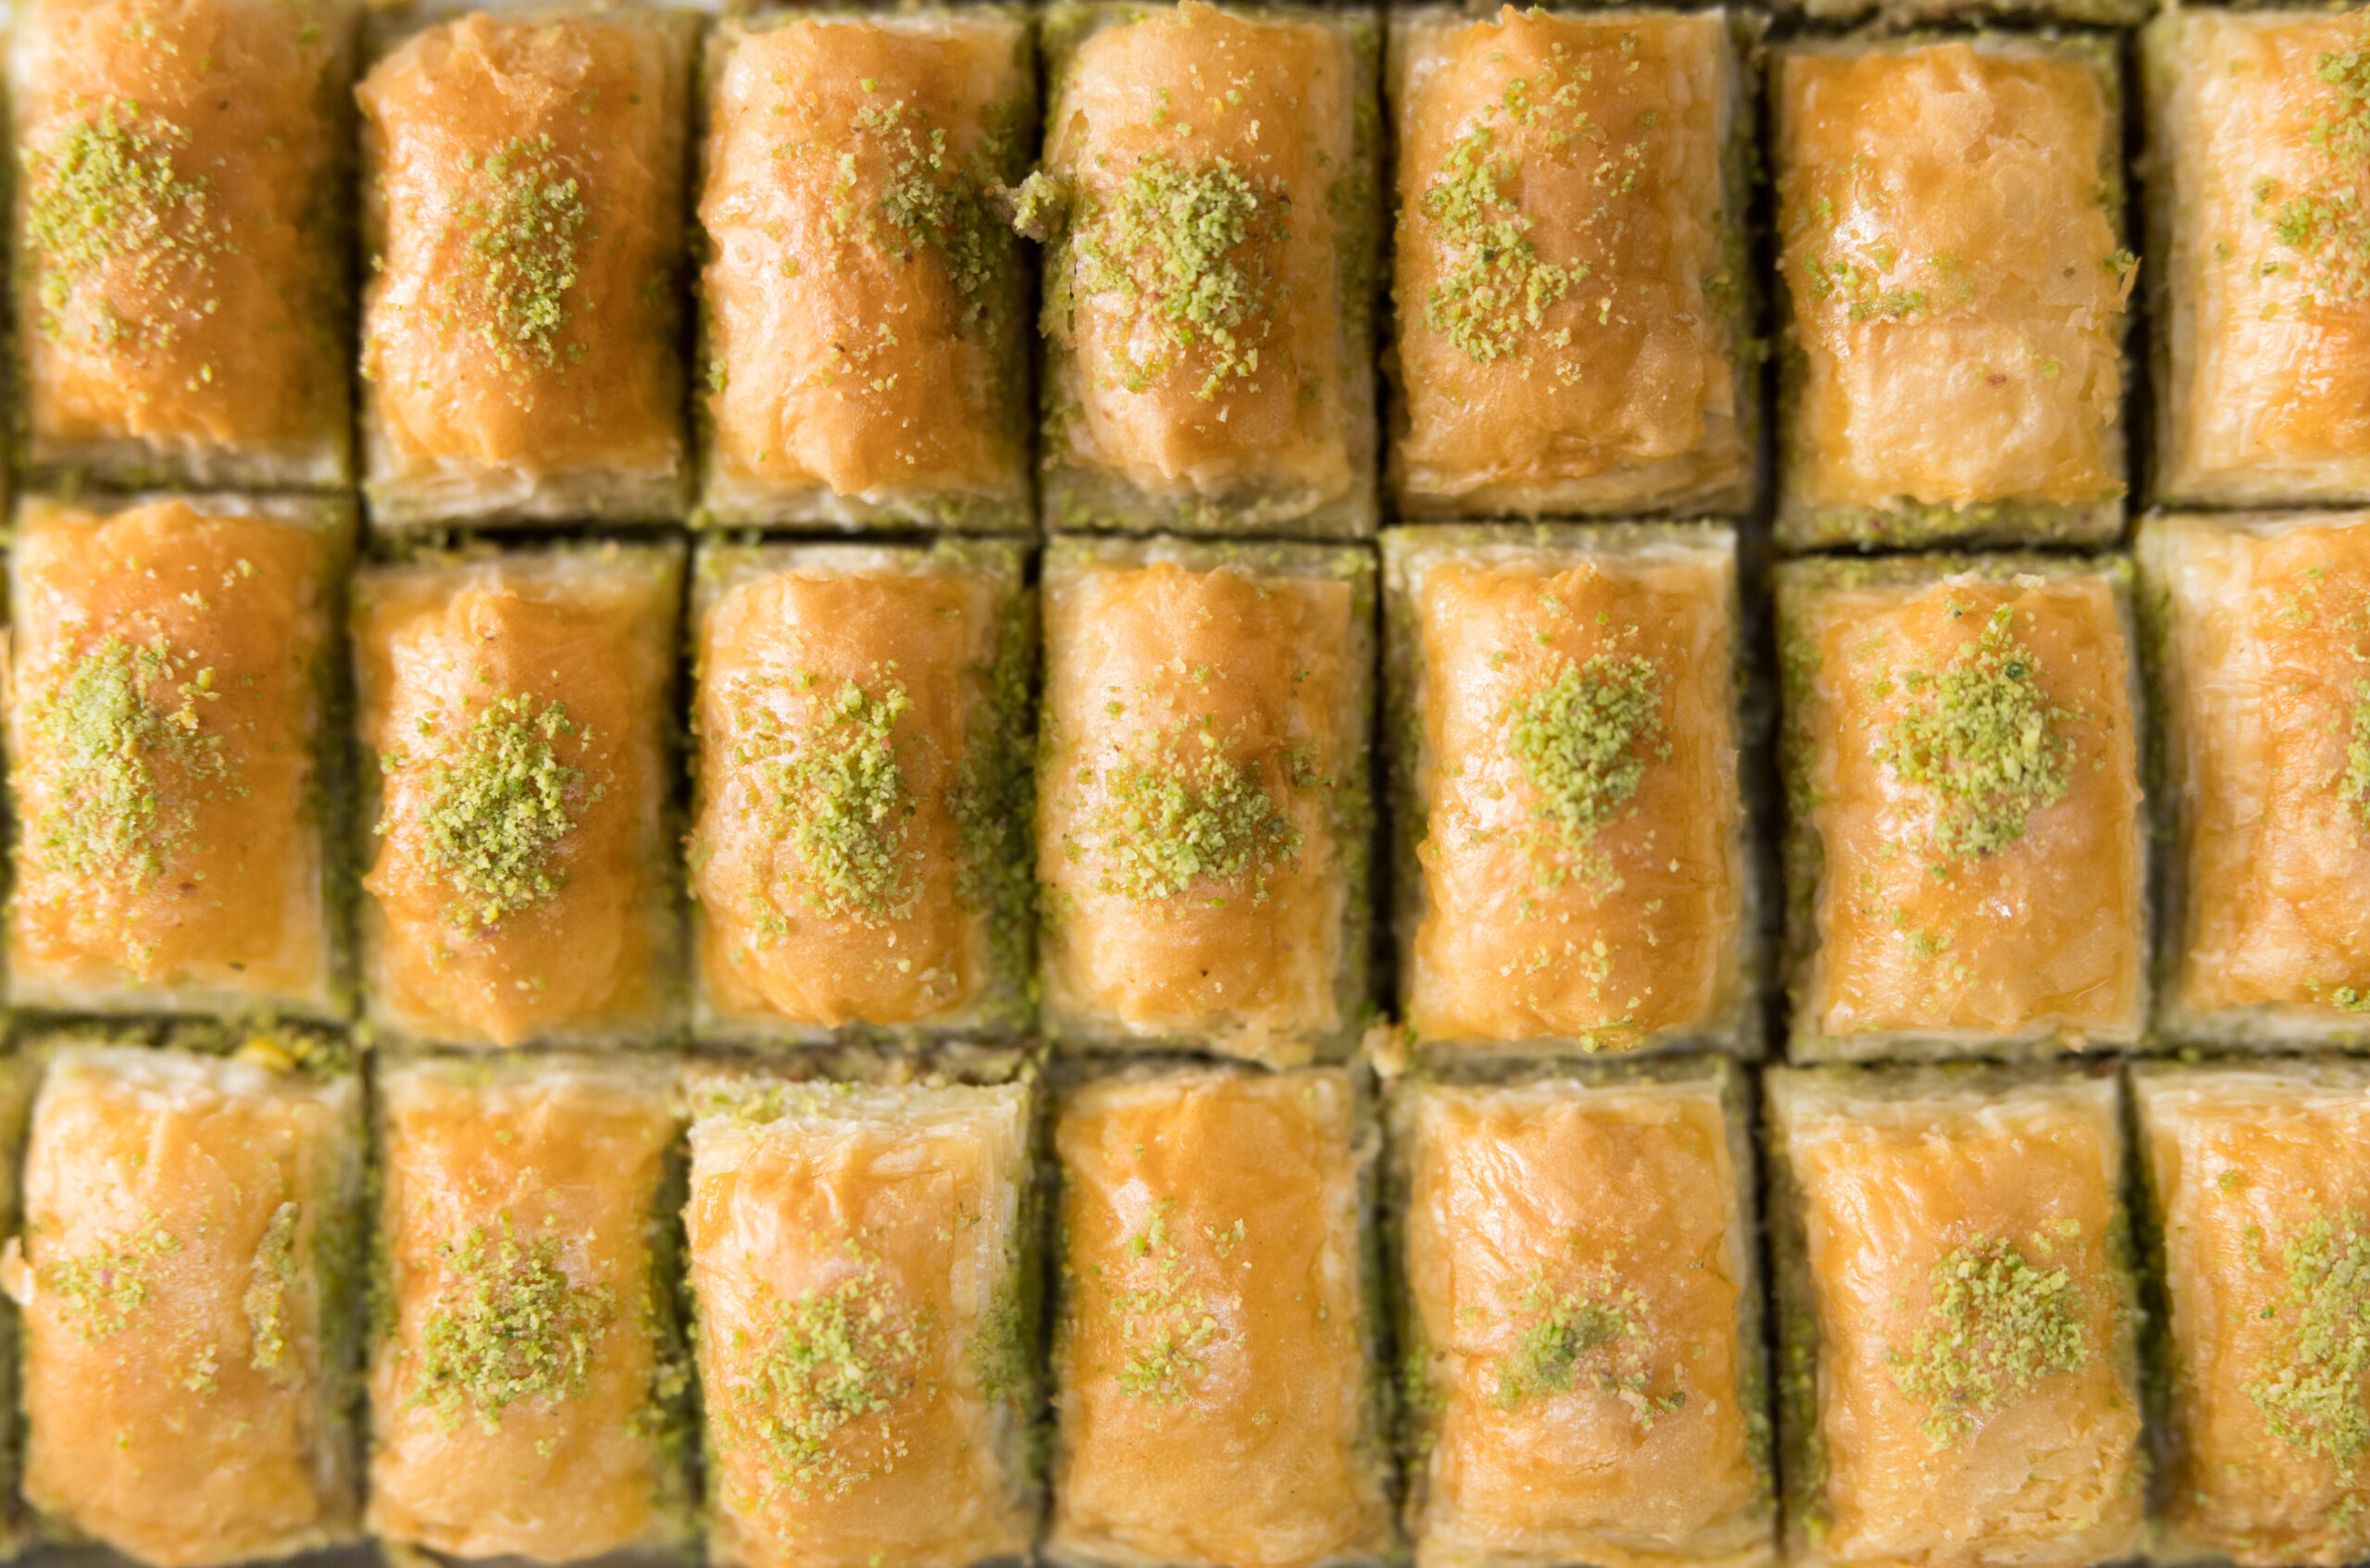 Baklava served at Odeh's